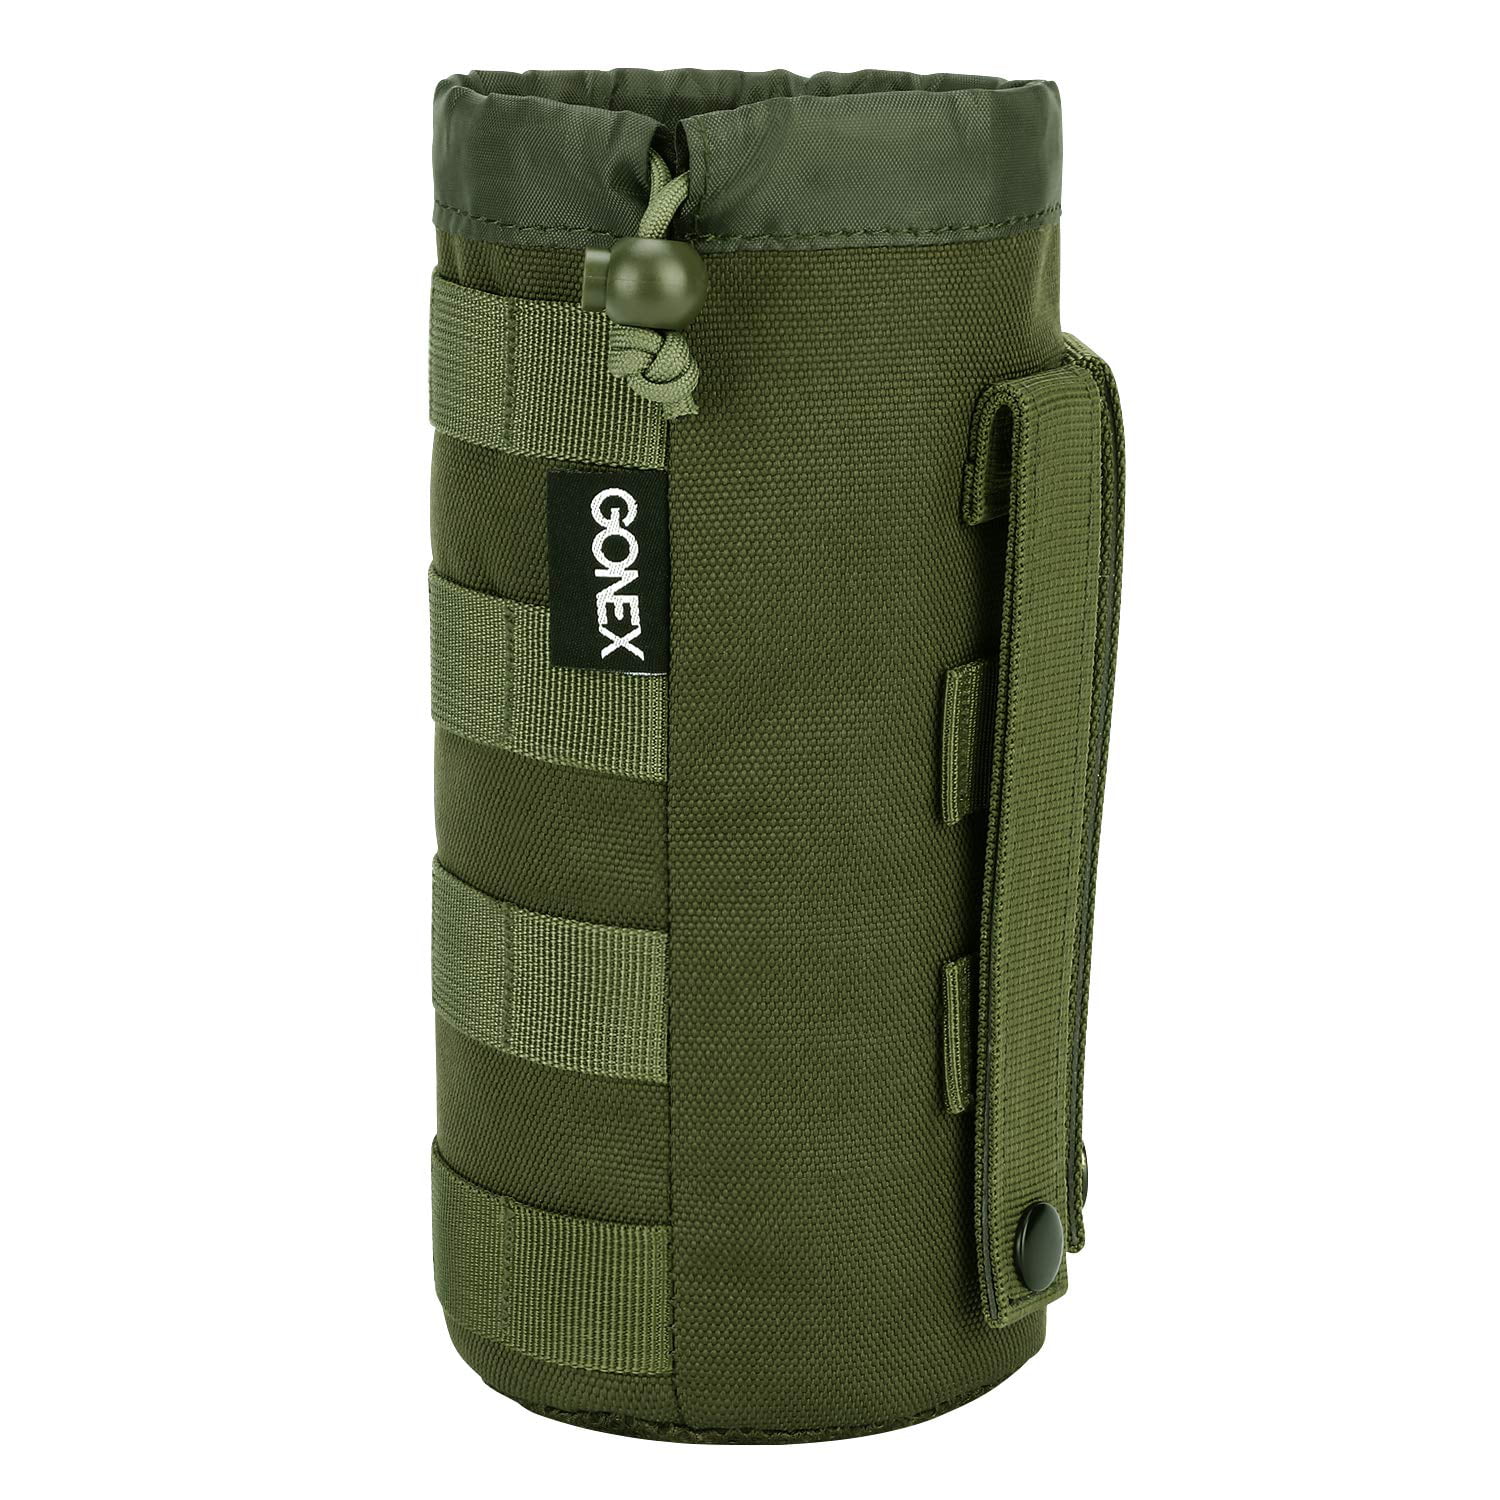 Gonex Tactical Molle Water Bottle Pouch H2O Hydration Carrier with Accessory Pouch